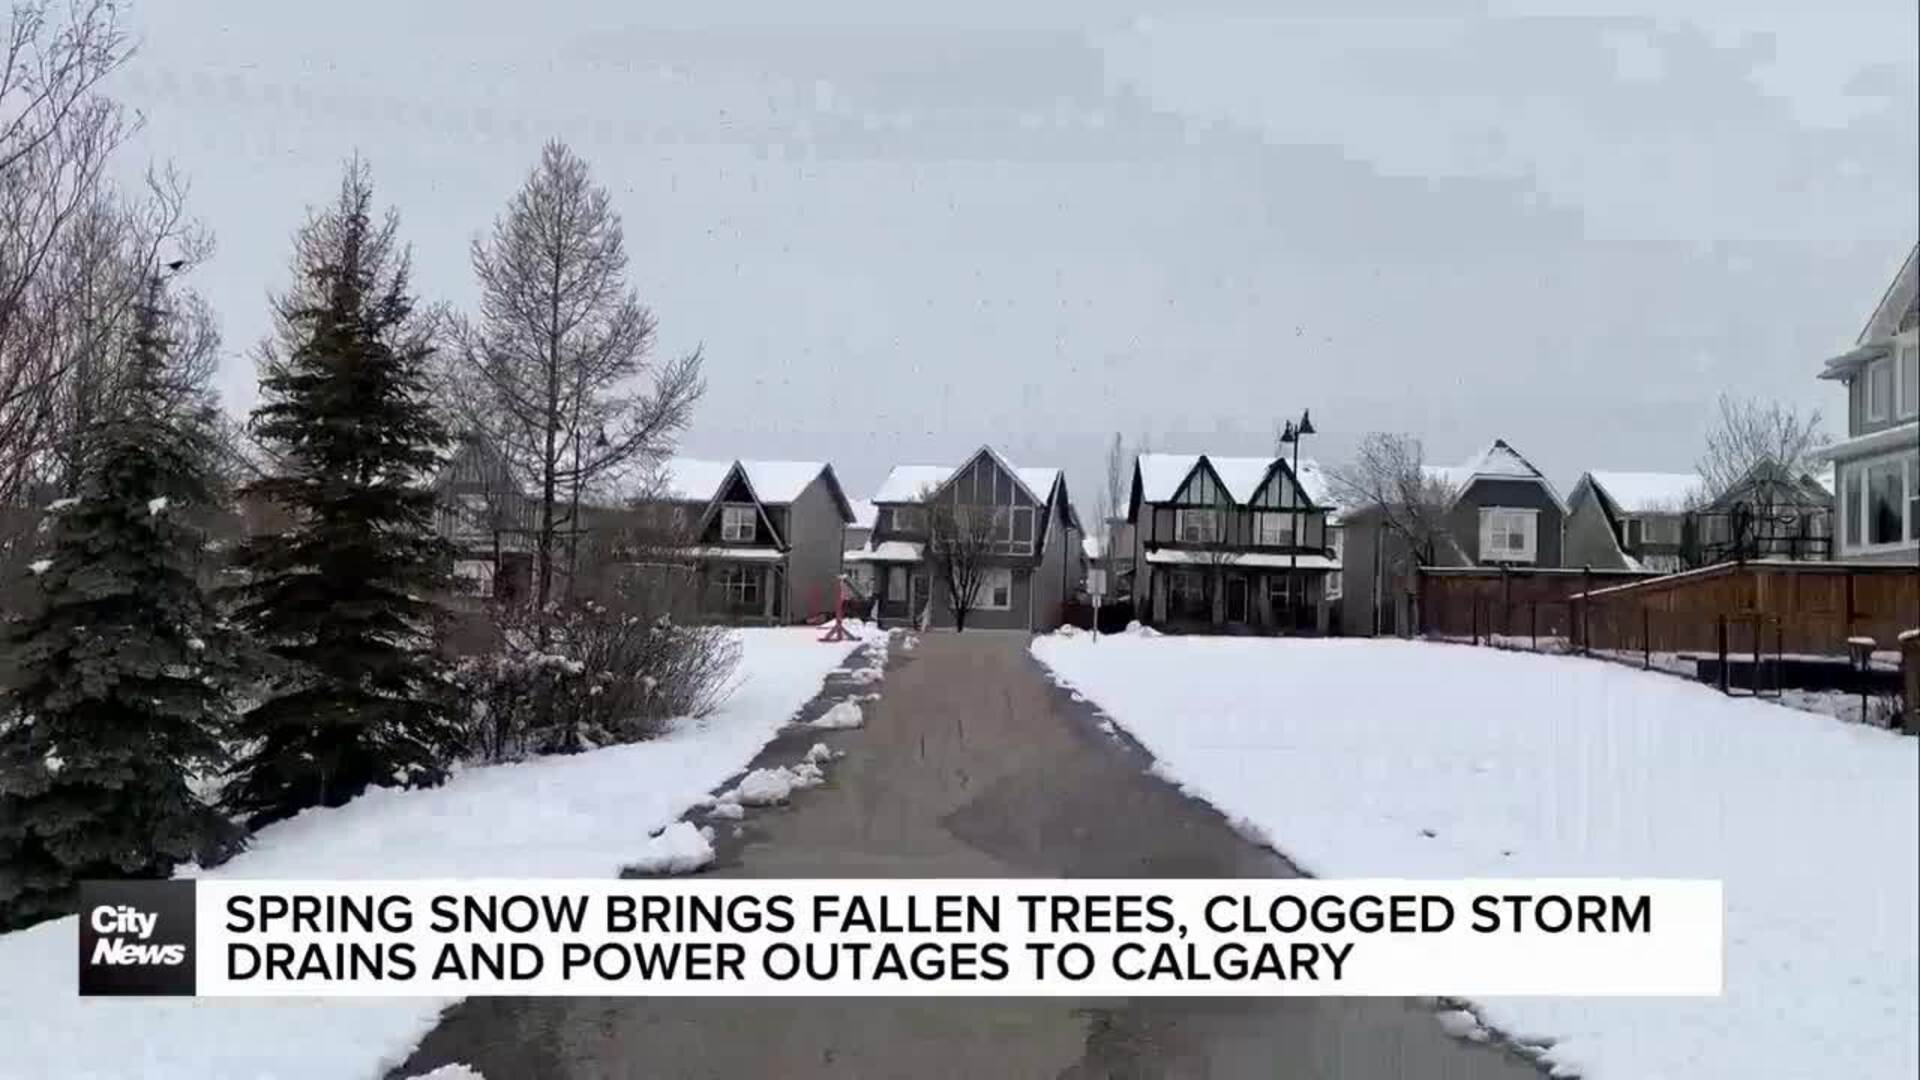 Spring snow brings fallen trees, clogged storm drains and power outages to Calgary